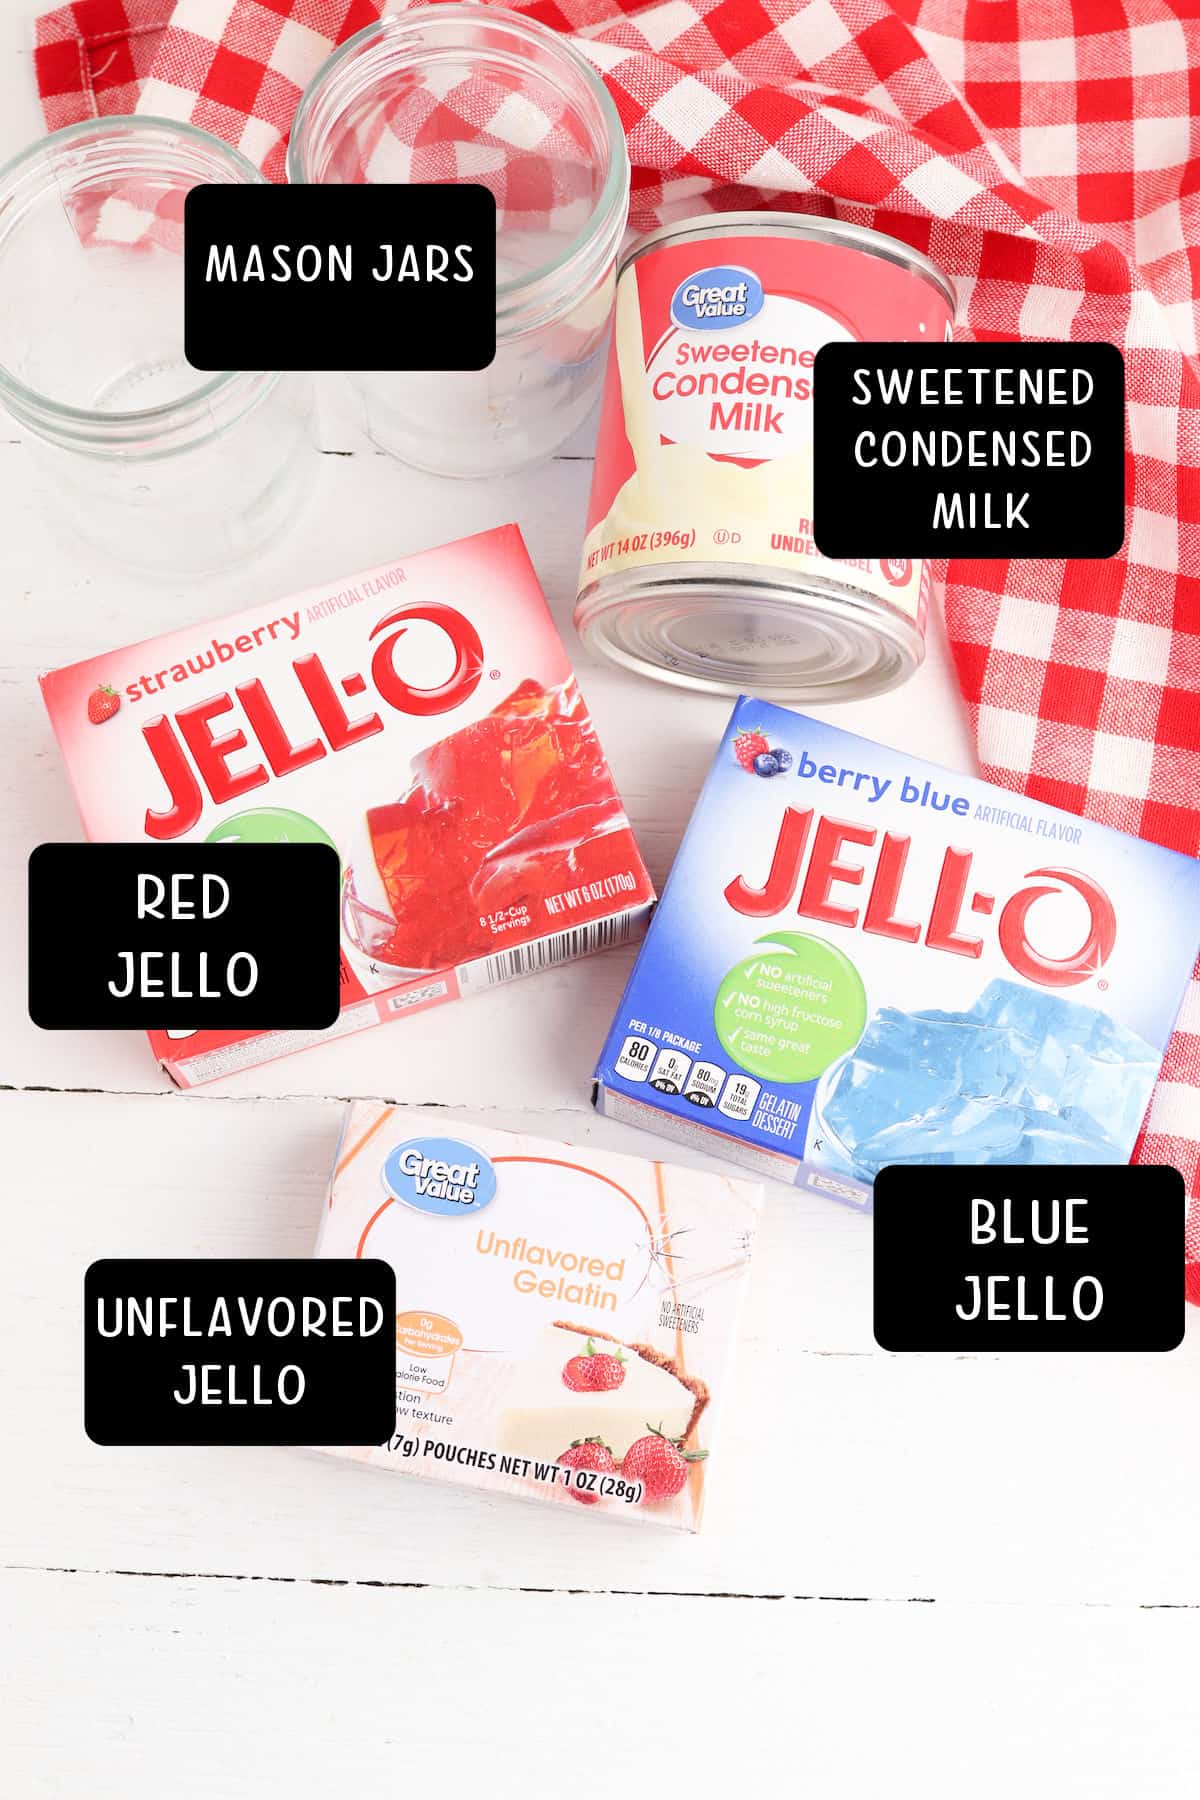 Boxes of jello, can of condensed milk, mason jars, on a white table with a red and white checked napkin.